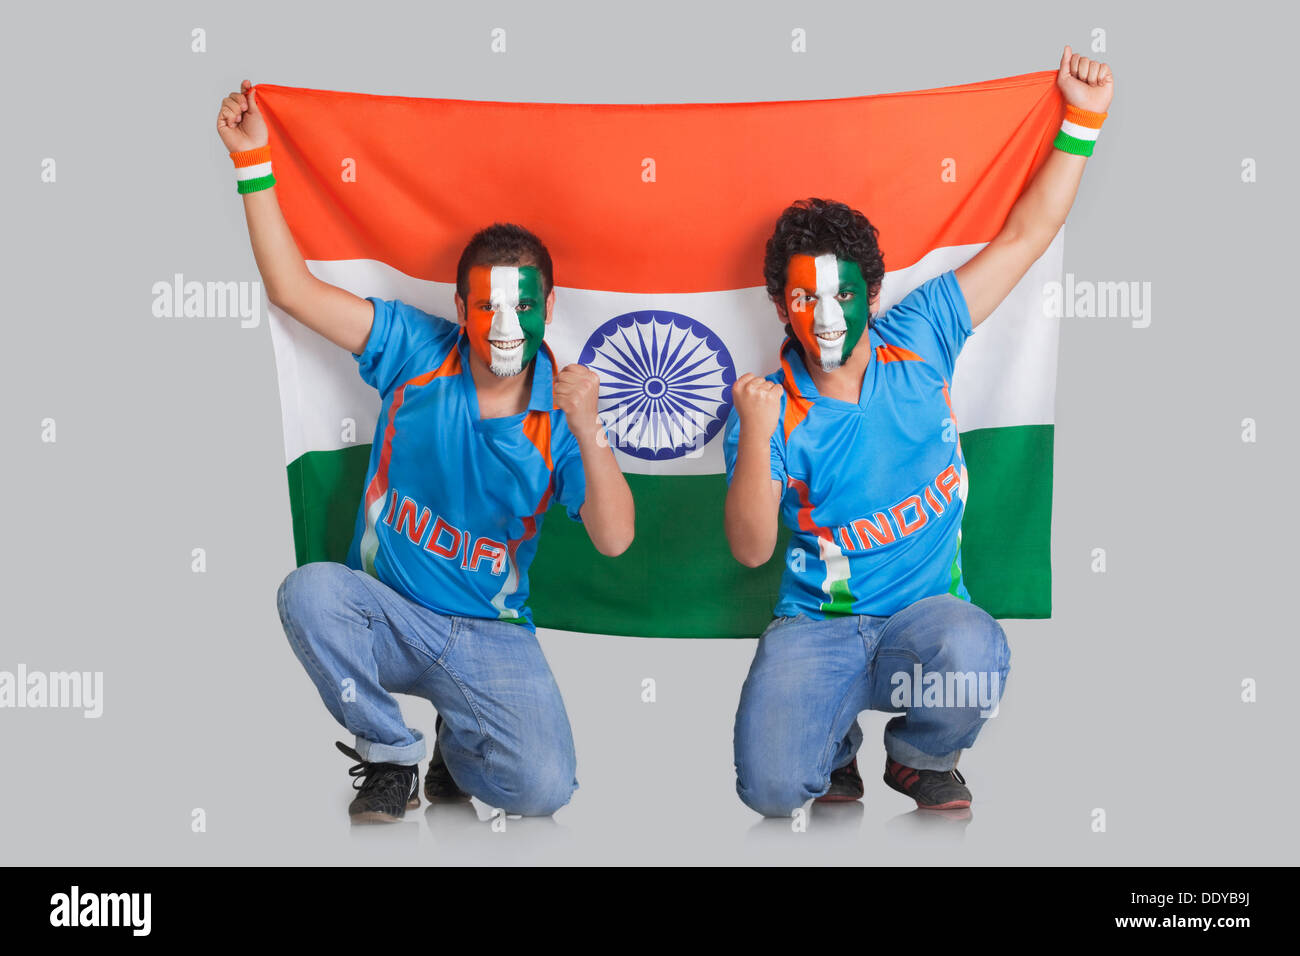 Male cricket fans with face painted in tricolor holding Indian flag over colored background Stock Photo